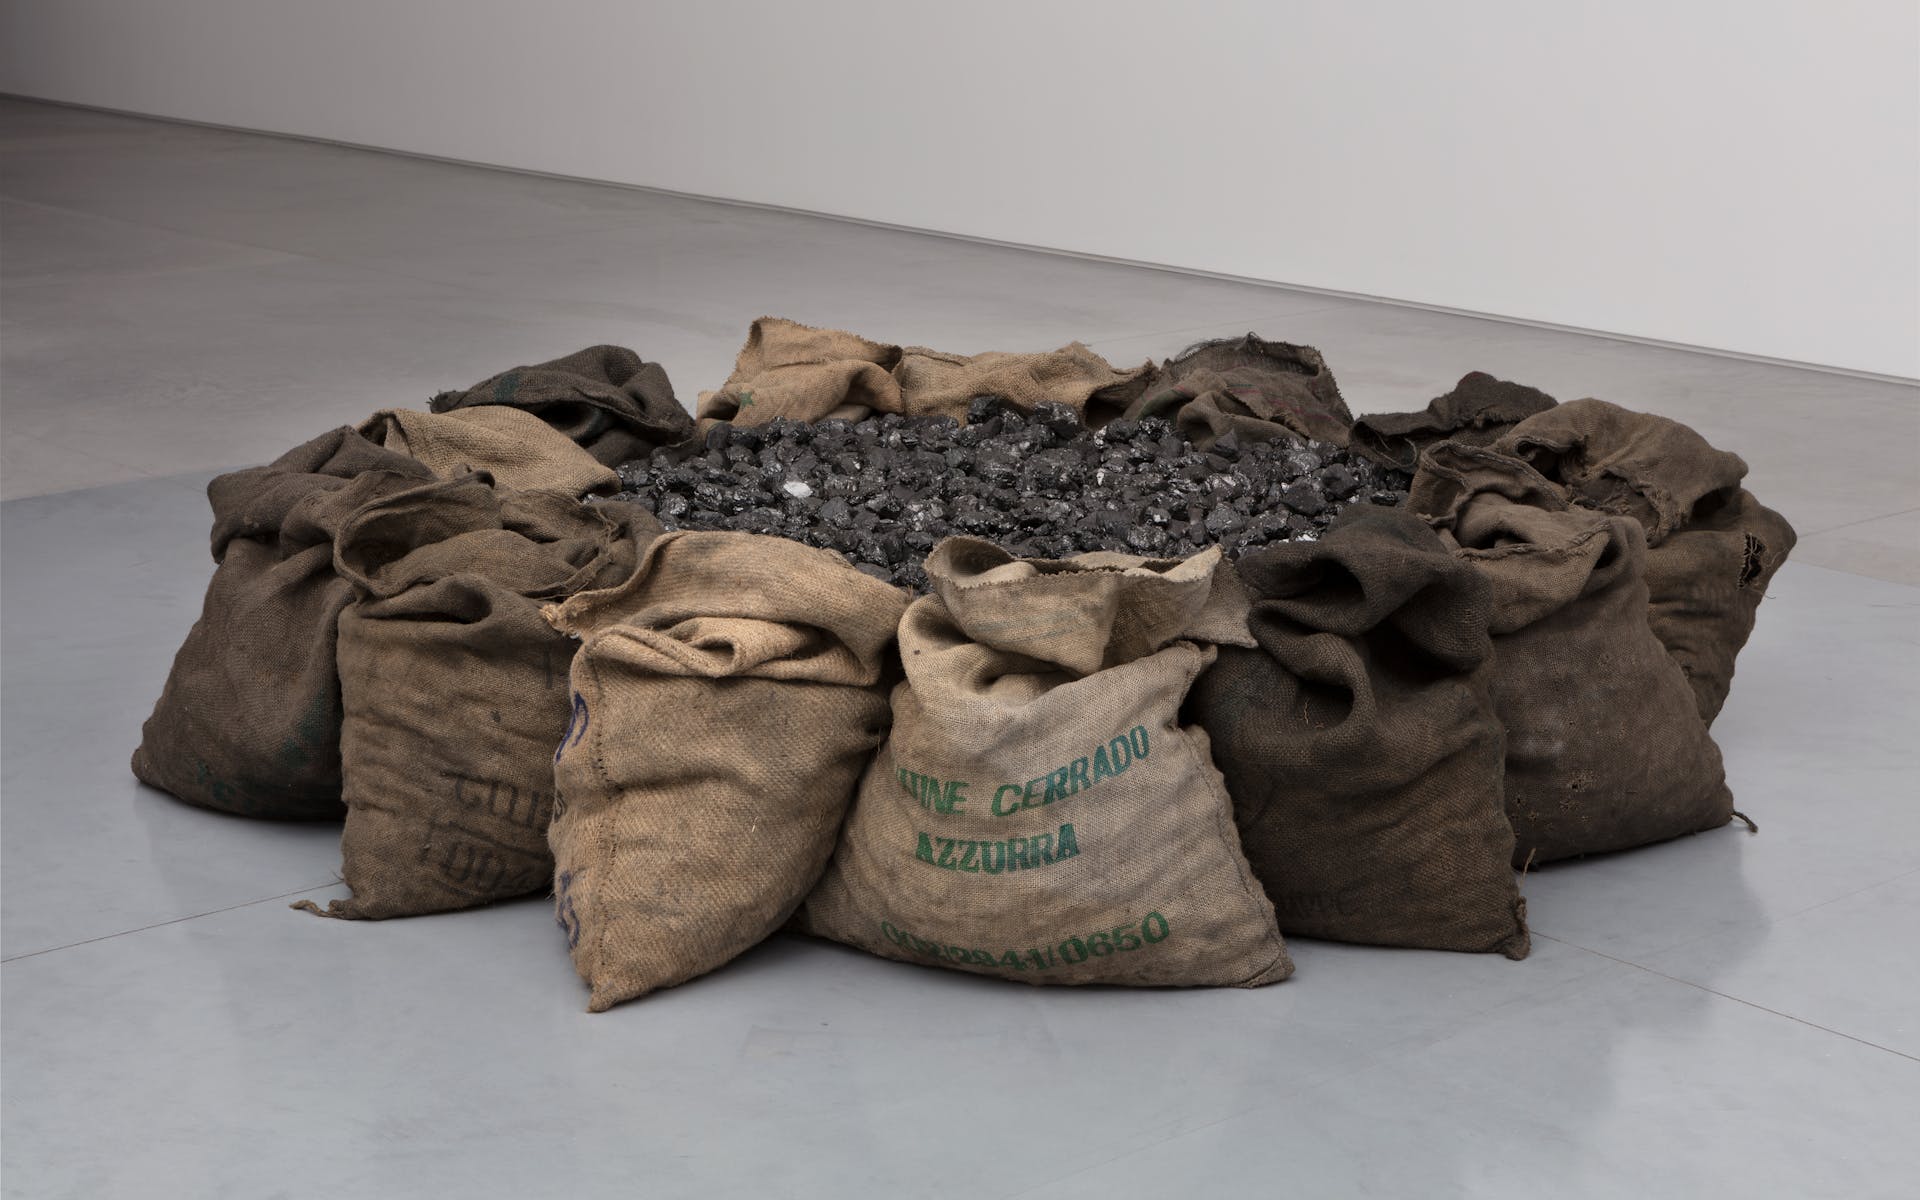 12 or so burlap sacks filled with dirt arranged in a circle in a gallery